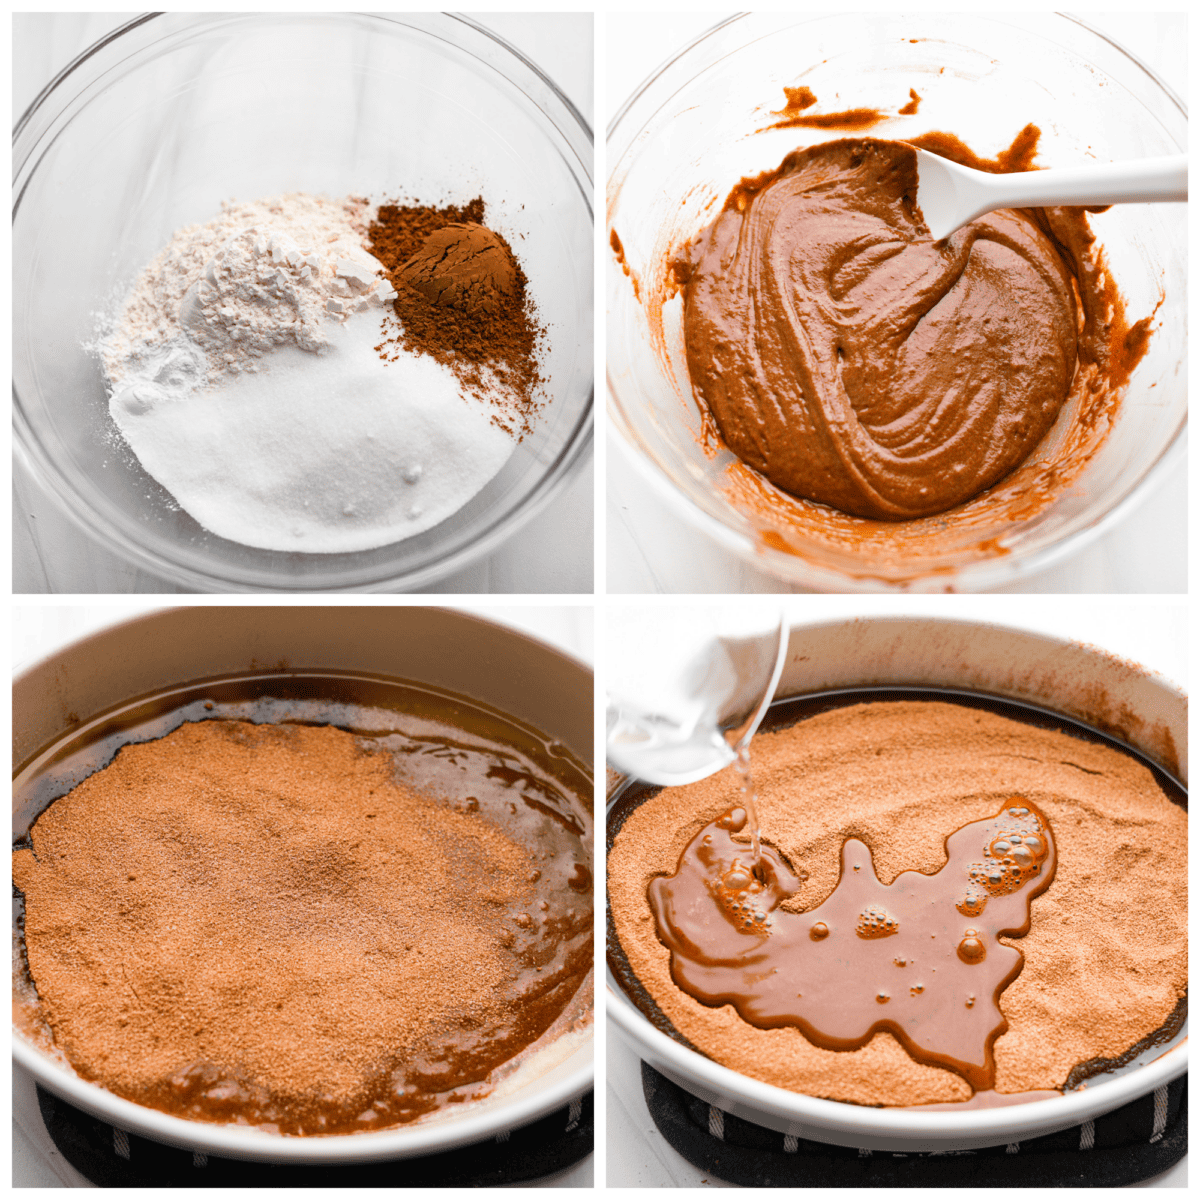 4 pictures showing the process of making the batter for chocolate cobbler. 